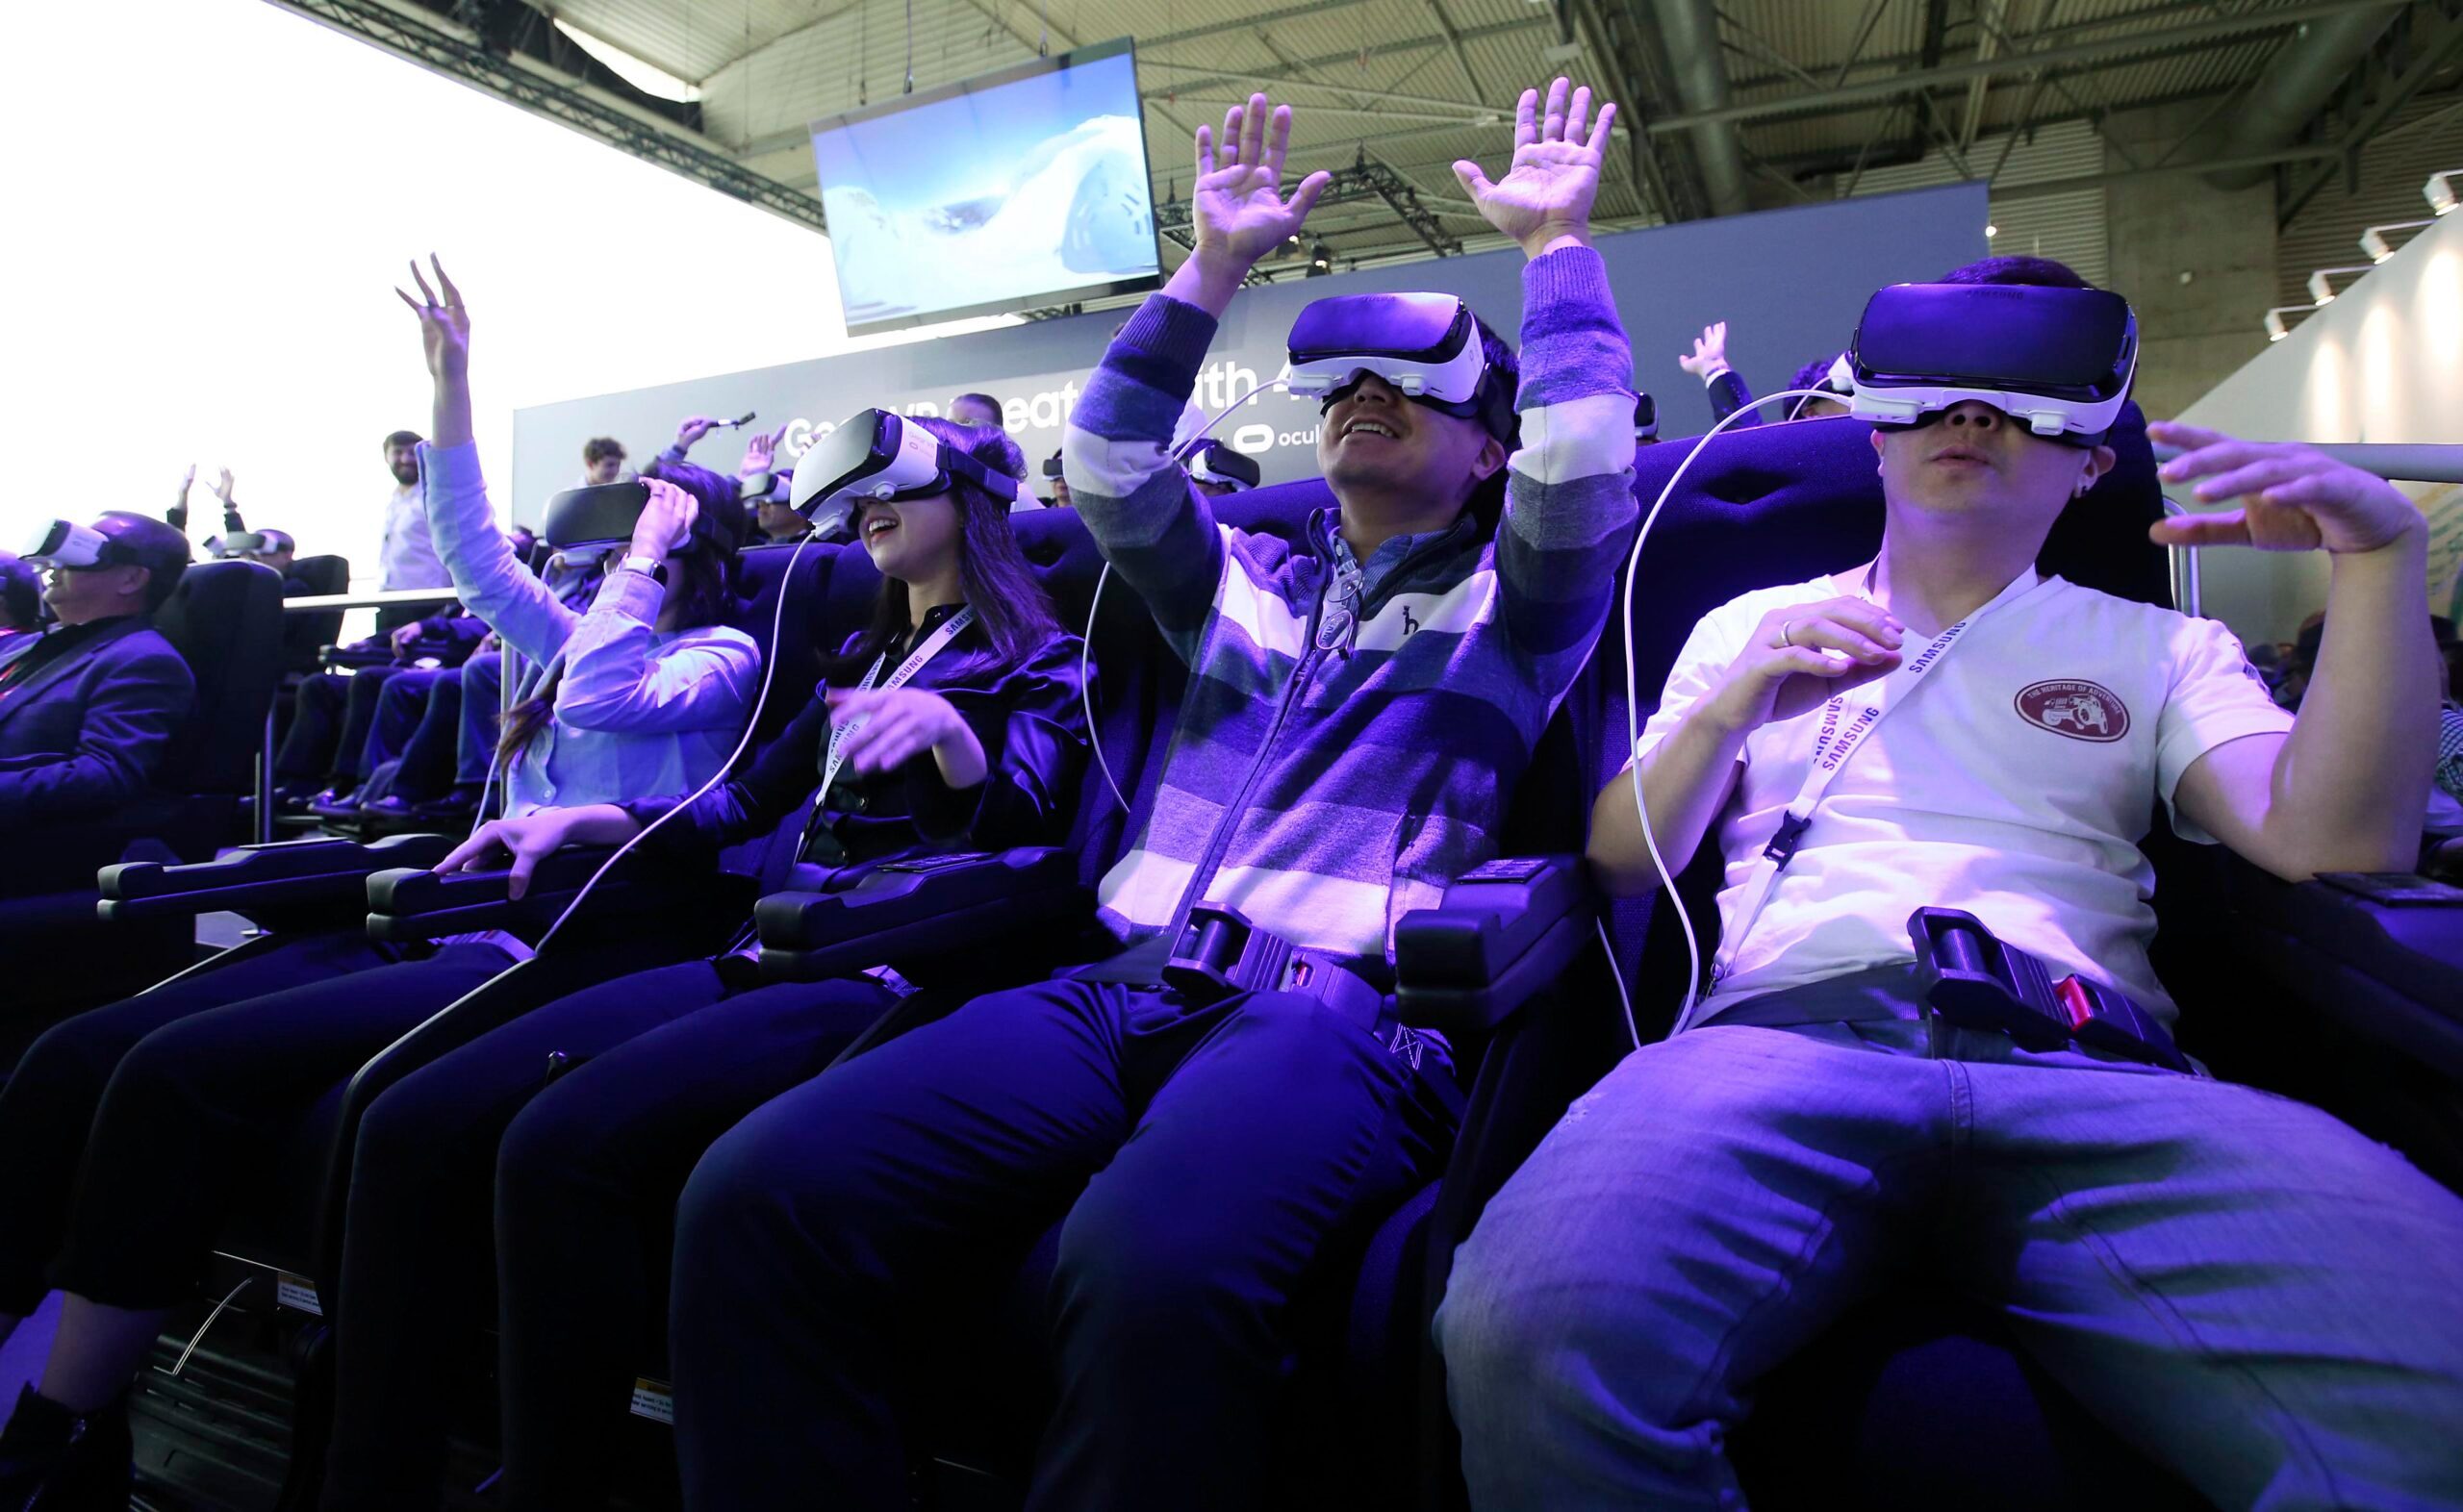 Virtual reality is next as smartphone sales slow